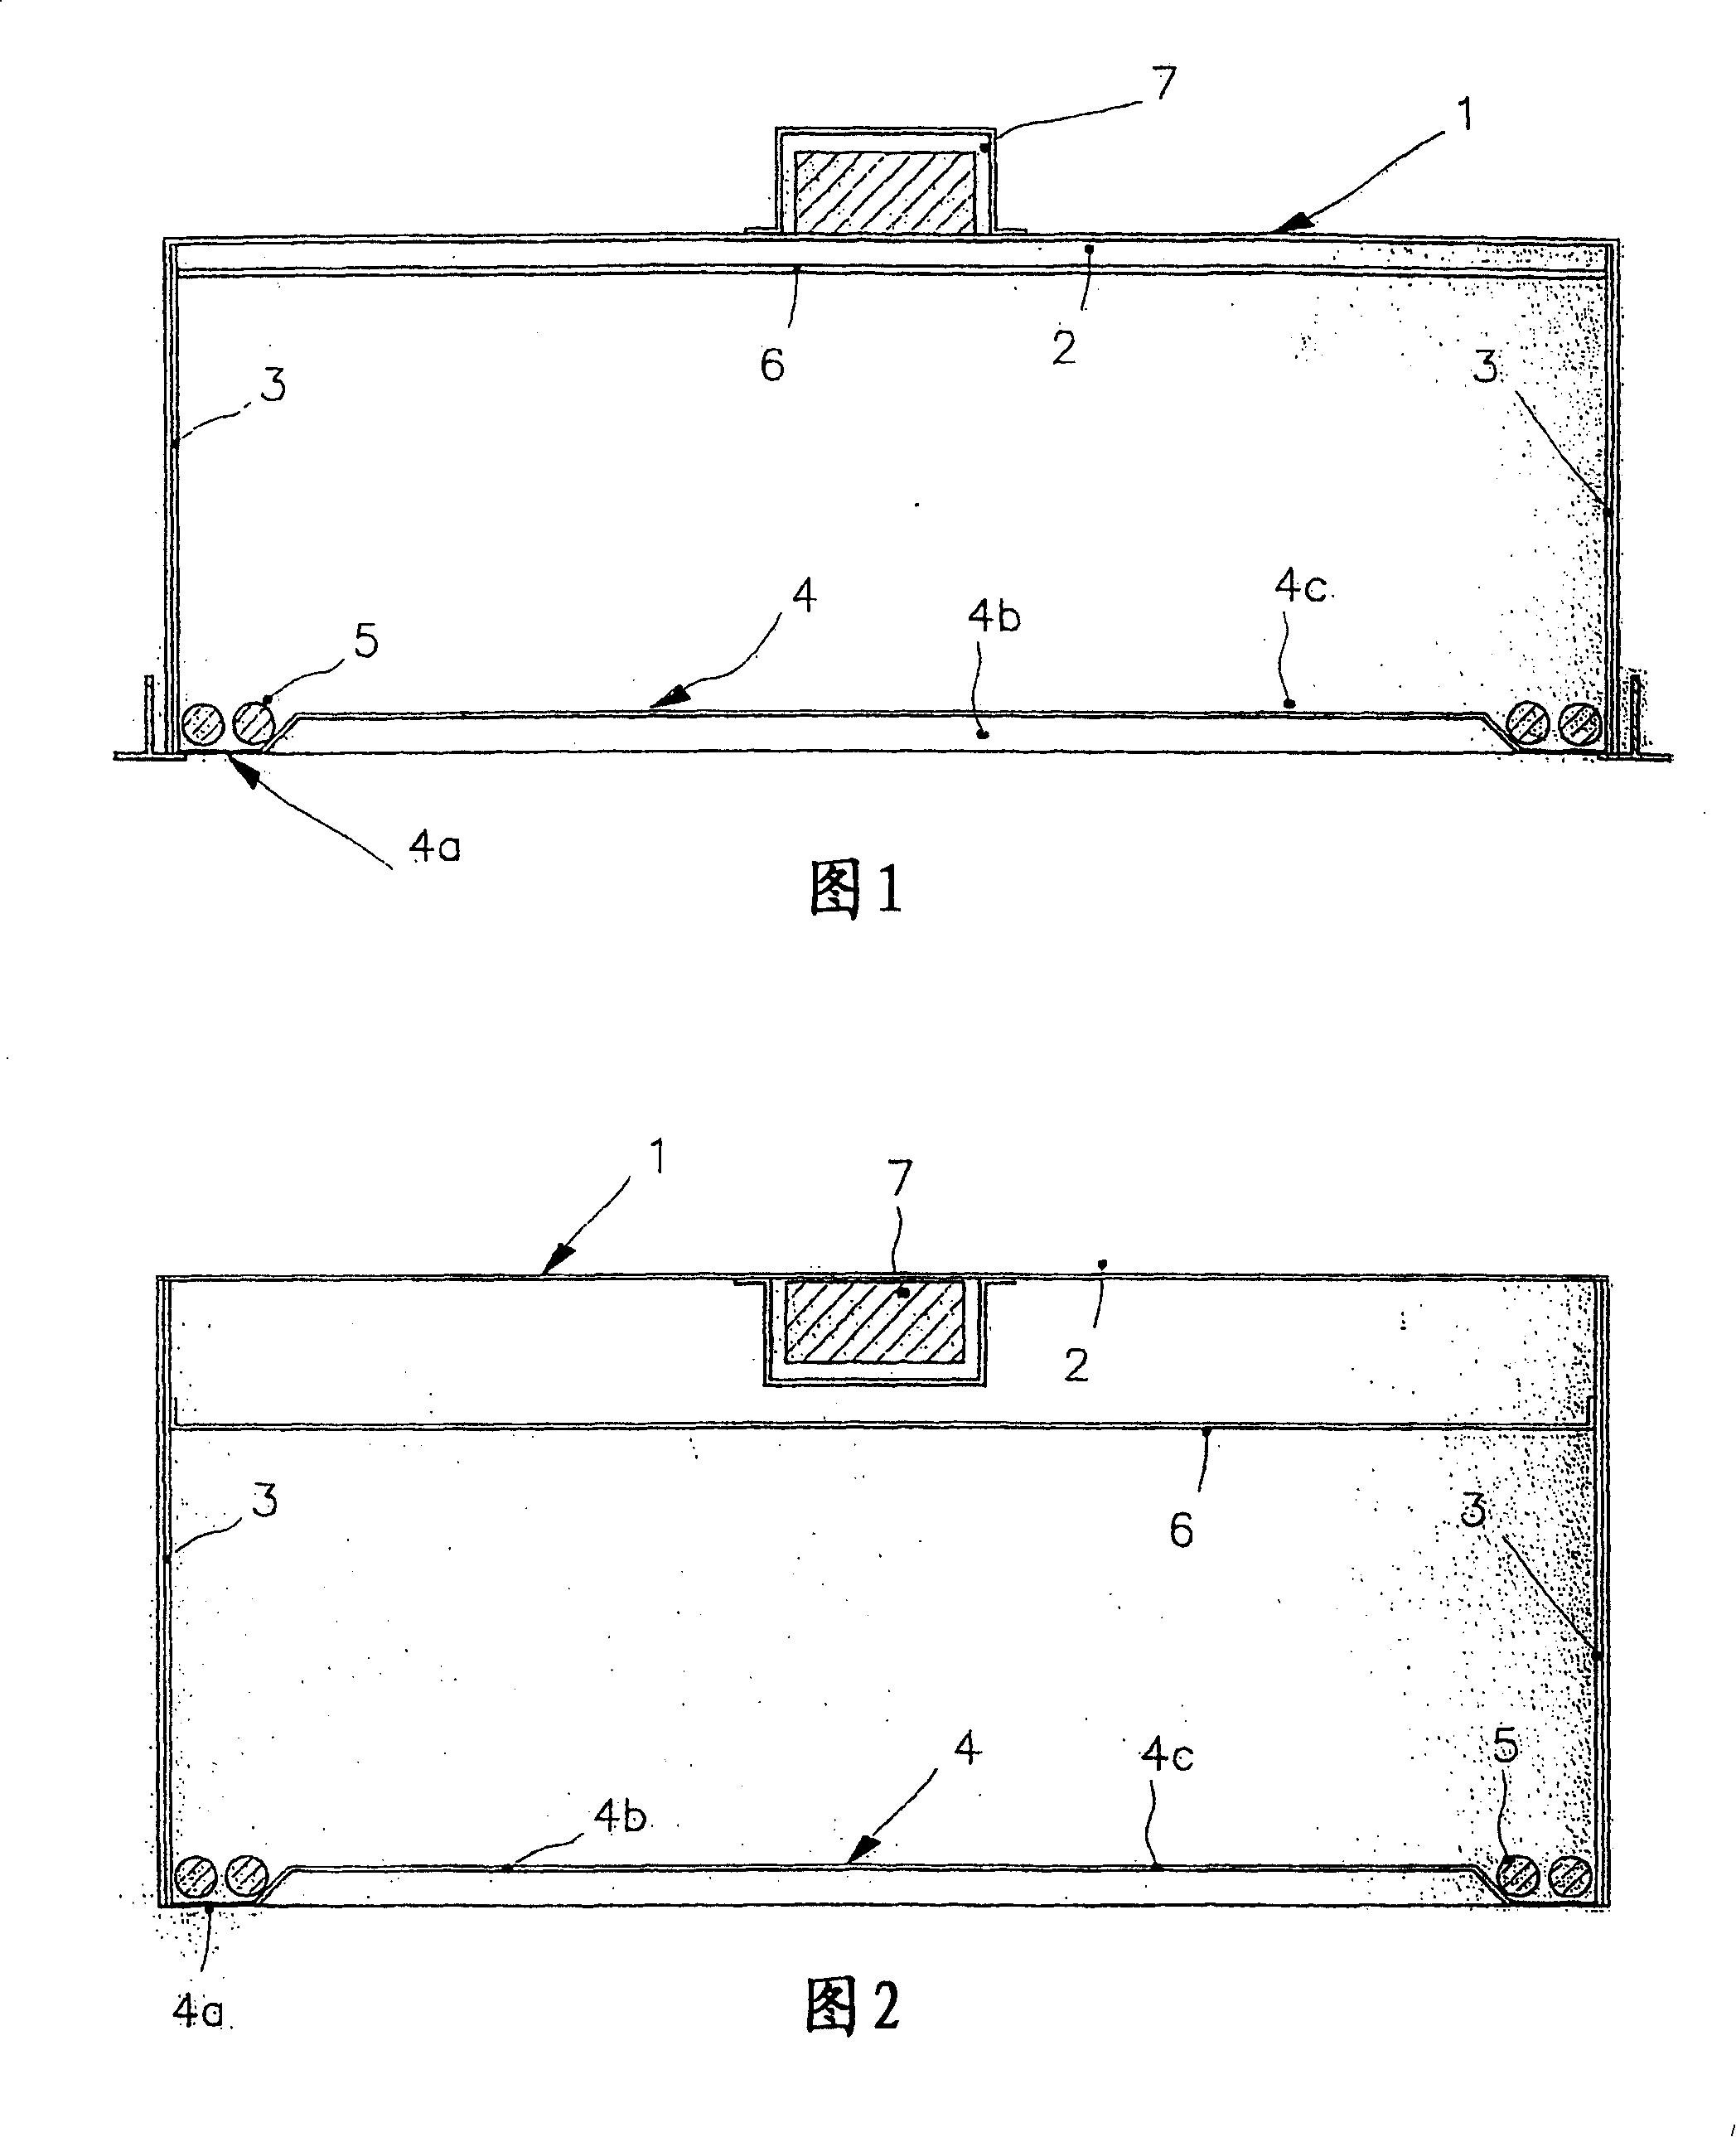 Embedded or ceiling-fitted illumination device with back reproducing decorative images